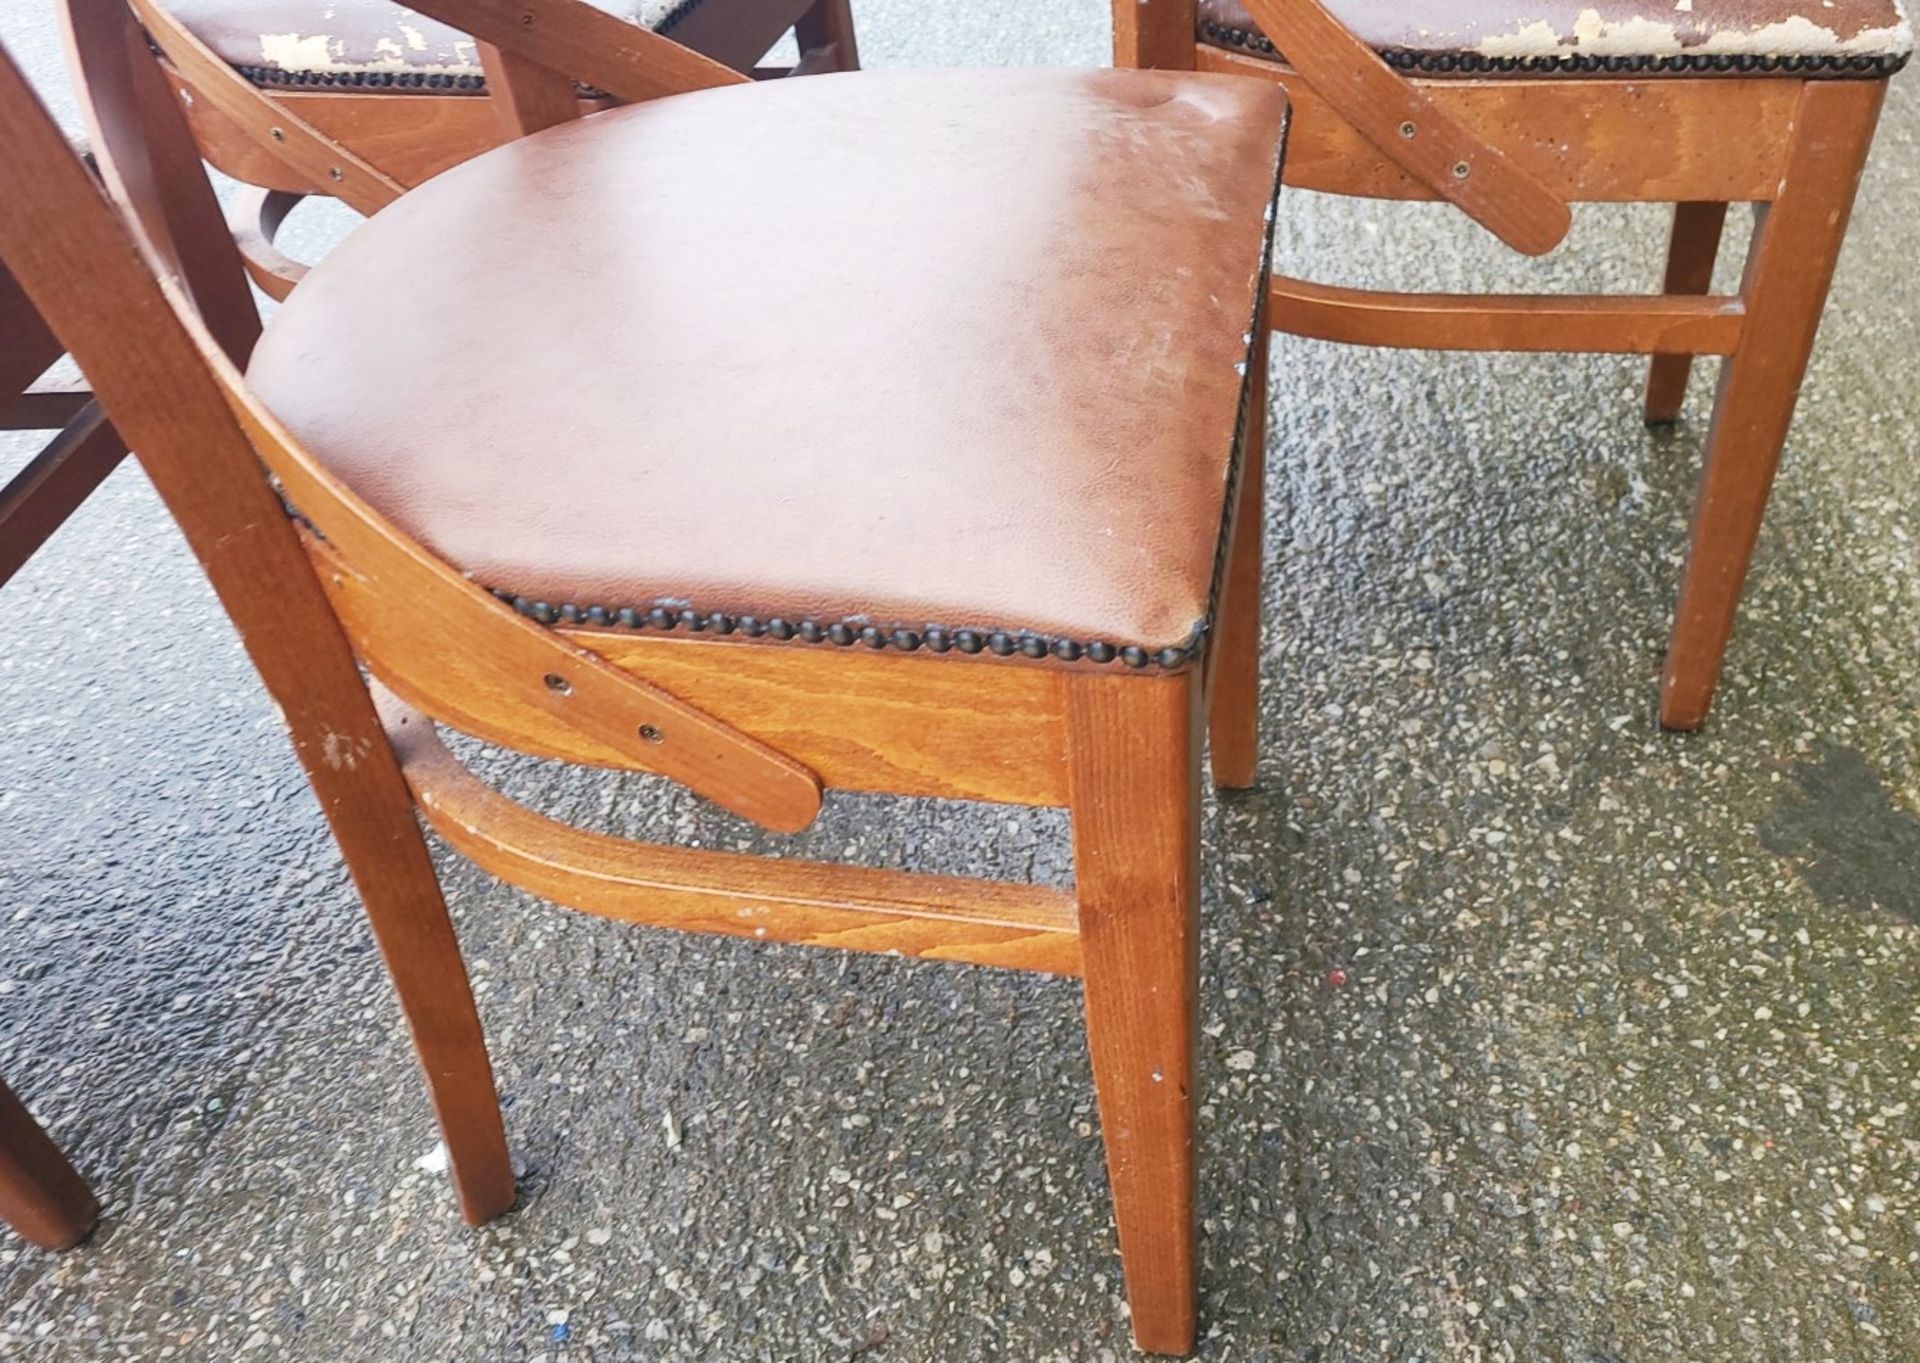 Set Of 4 x 'Leopold' Style Bentwood Side Chair In Walnut Stain & Faux Brown Leather Seat Cushion - Image 4 of 5